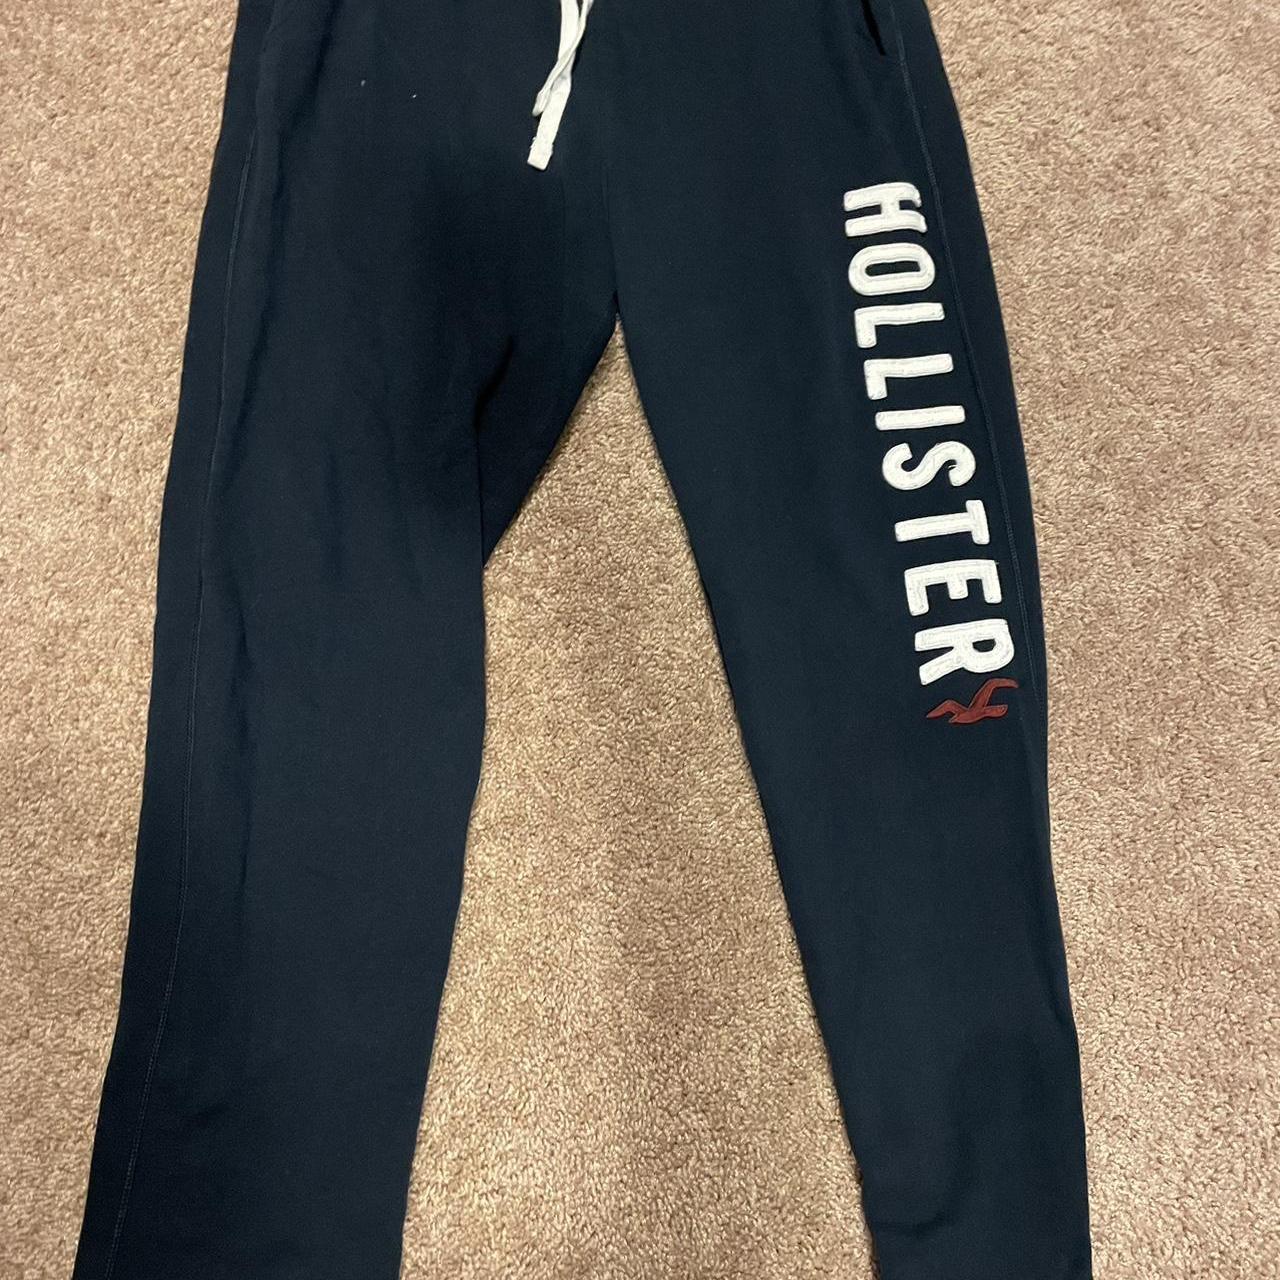 Men's Hollister Co Sweatpants, Preowned & Used